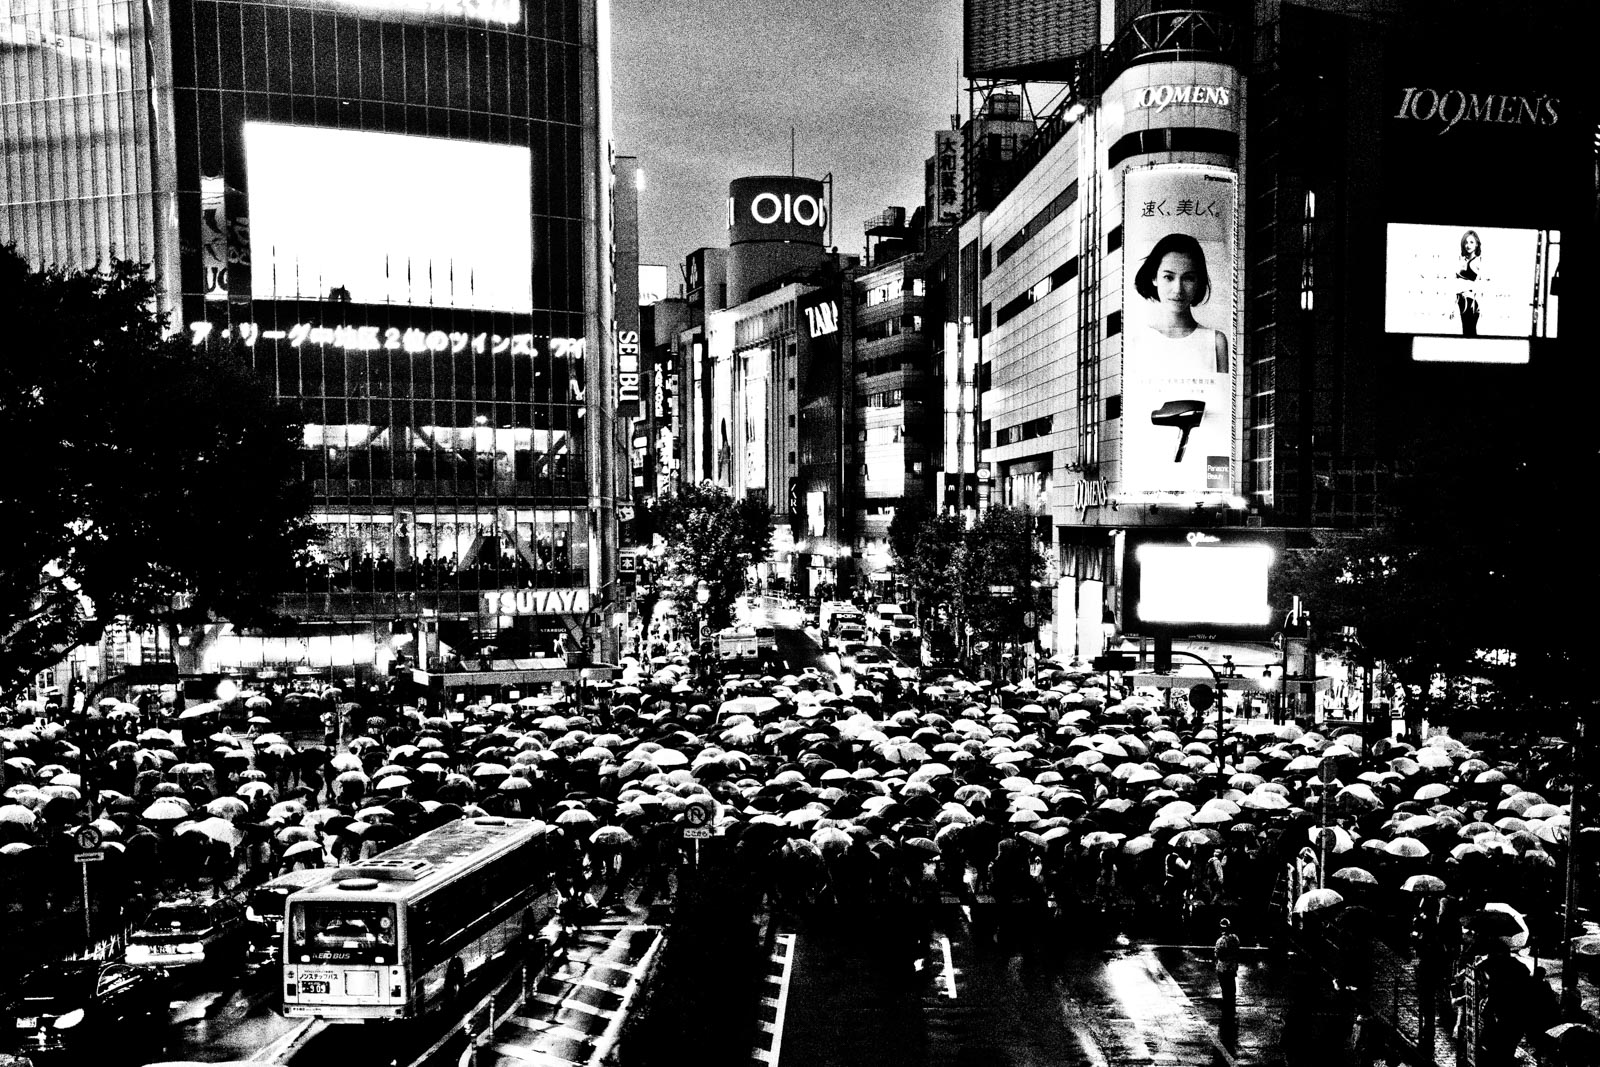 Overview of a rainy Shibuya with lots of umbrellas. Street Photography by Victor Borst